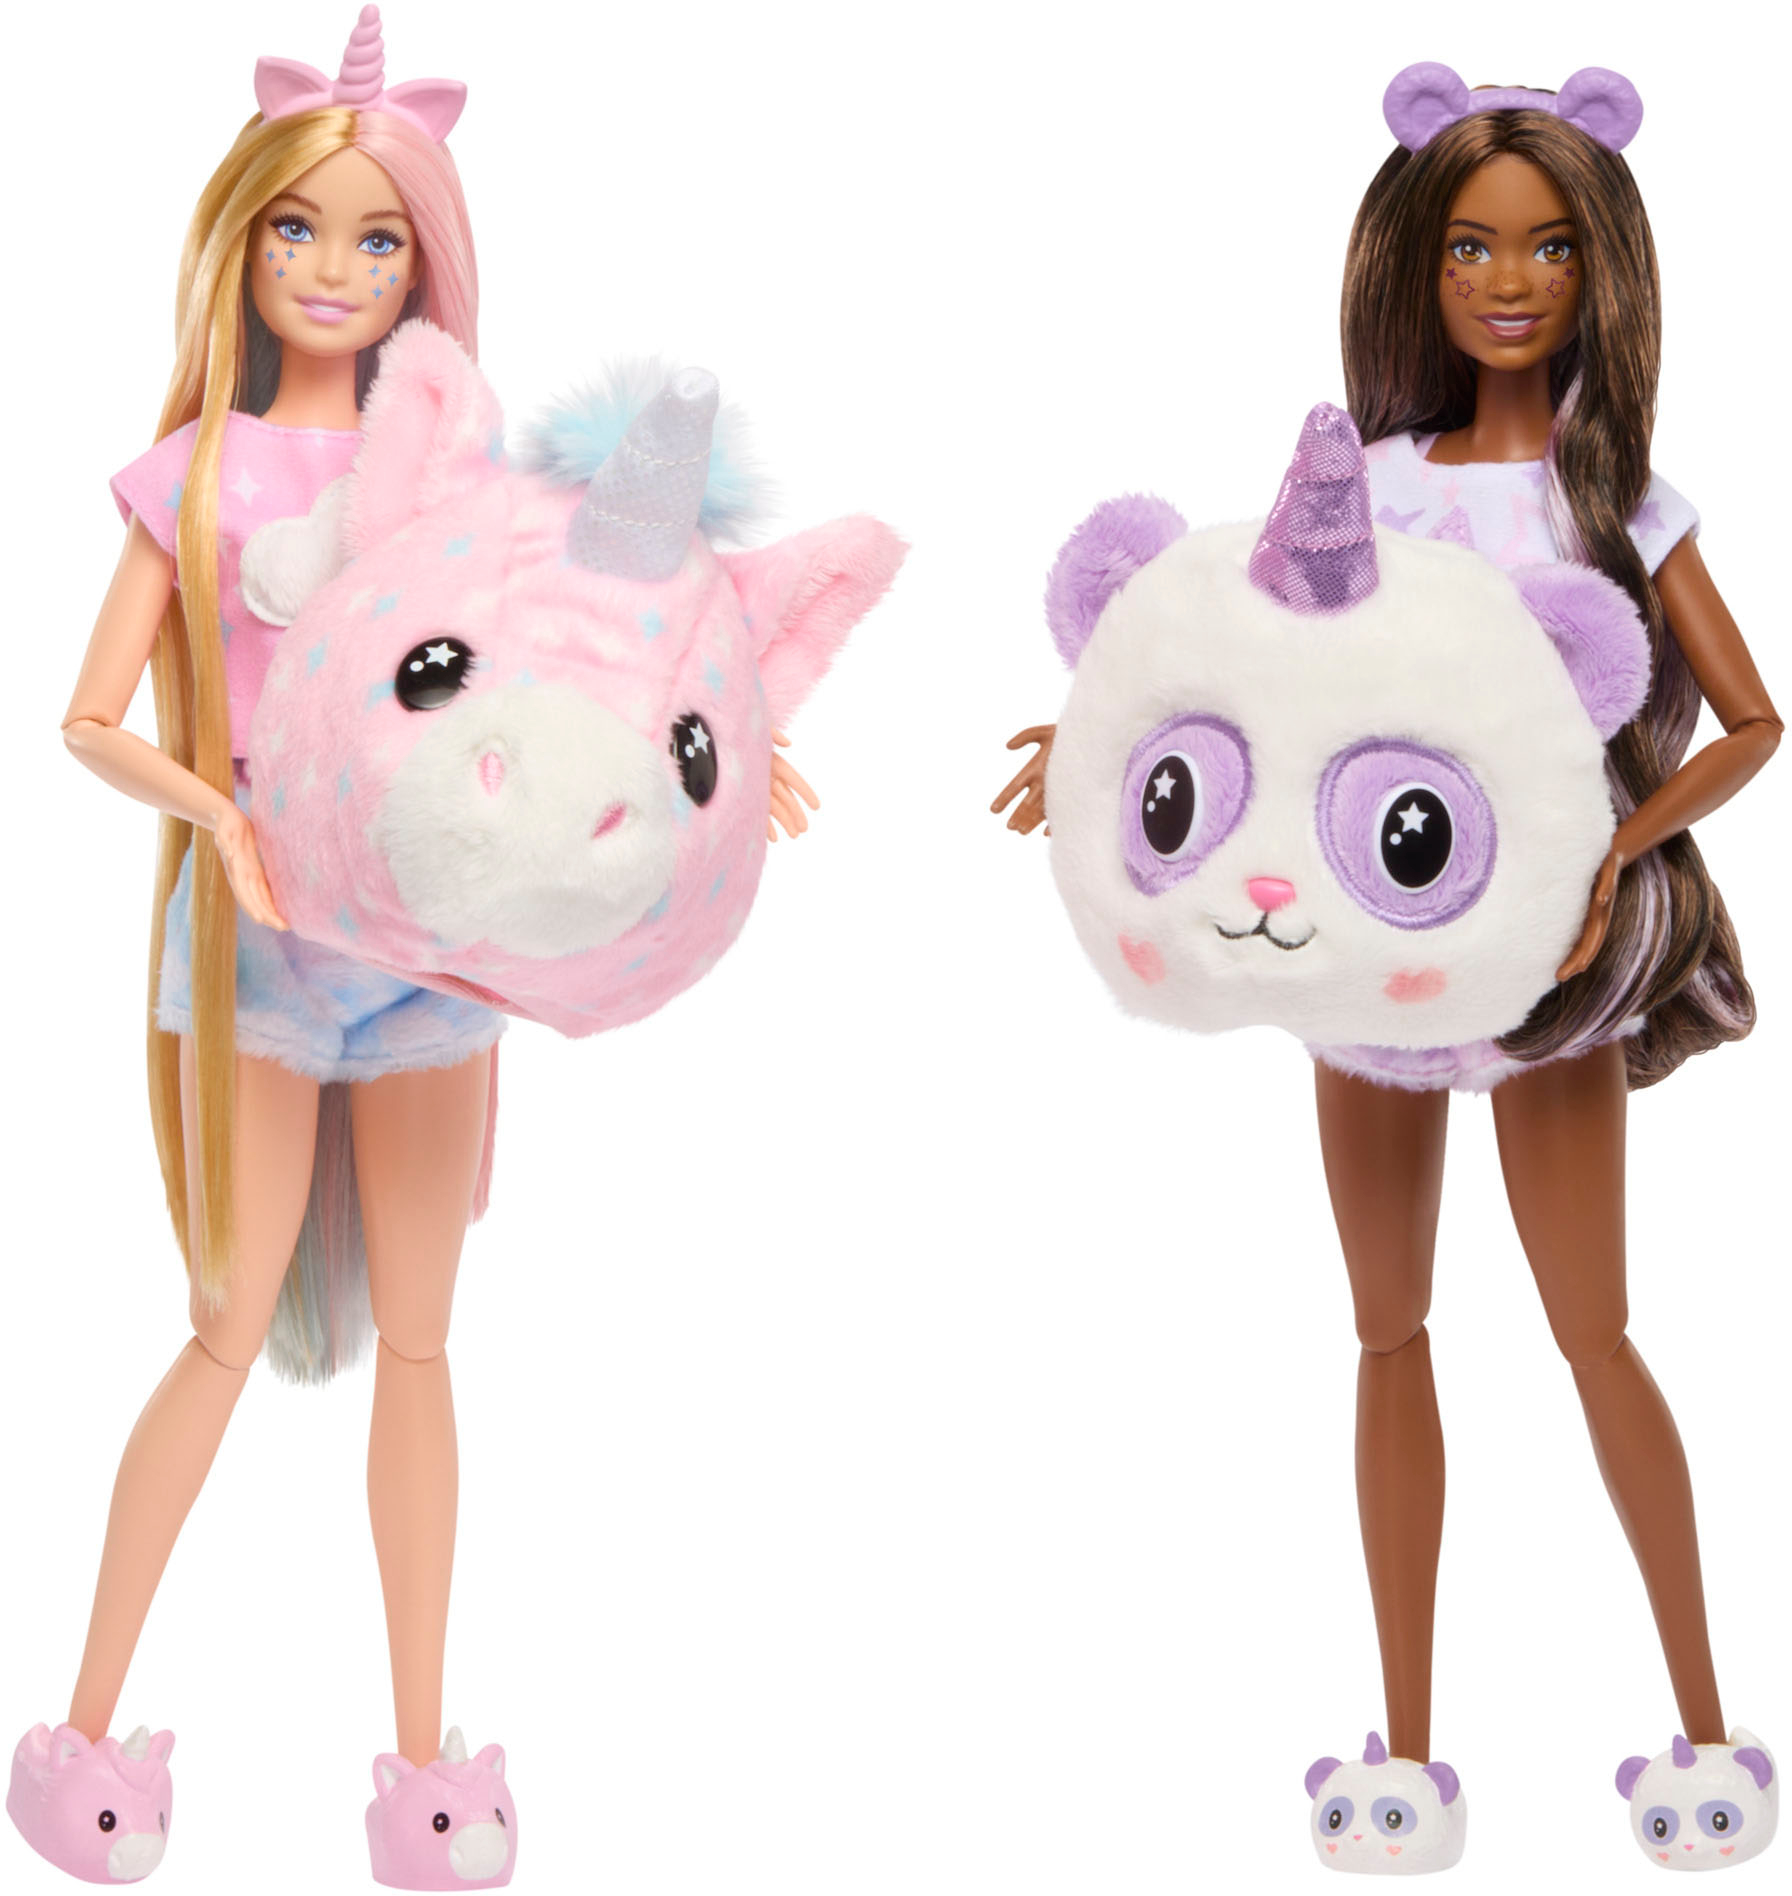 Barbie Cutie Reveal Cozy Cute Tees Slumber Party Gift Set with Dolls  Multicolor HRY15 - Best Buy